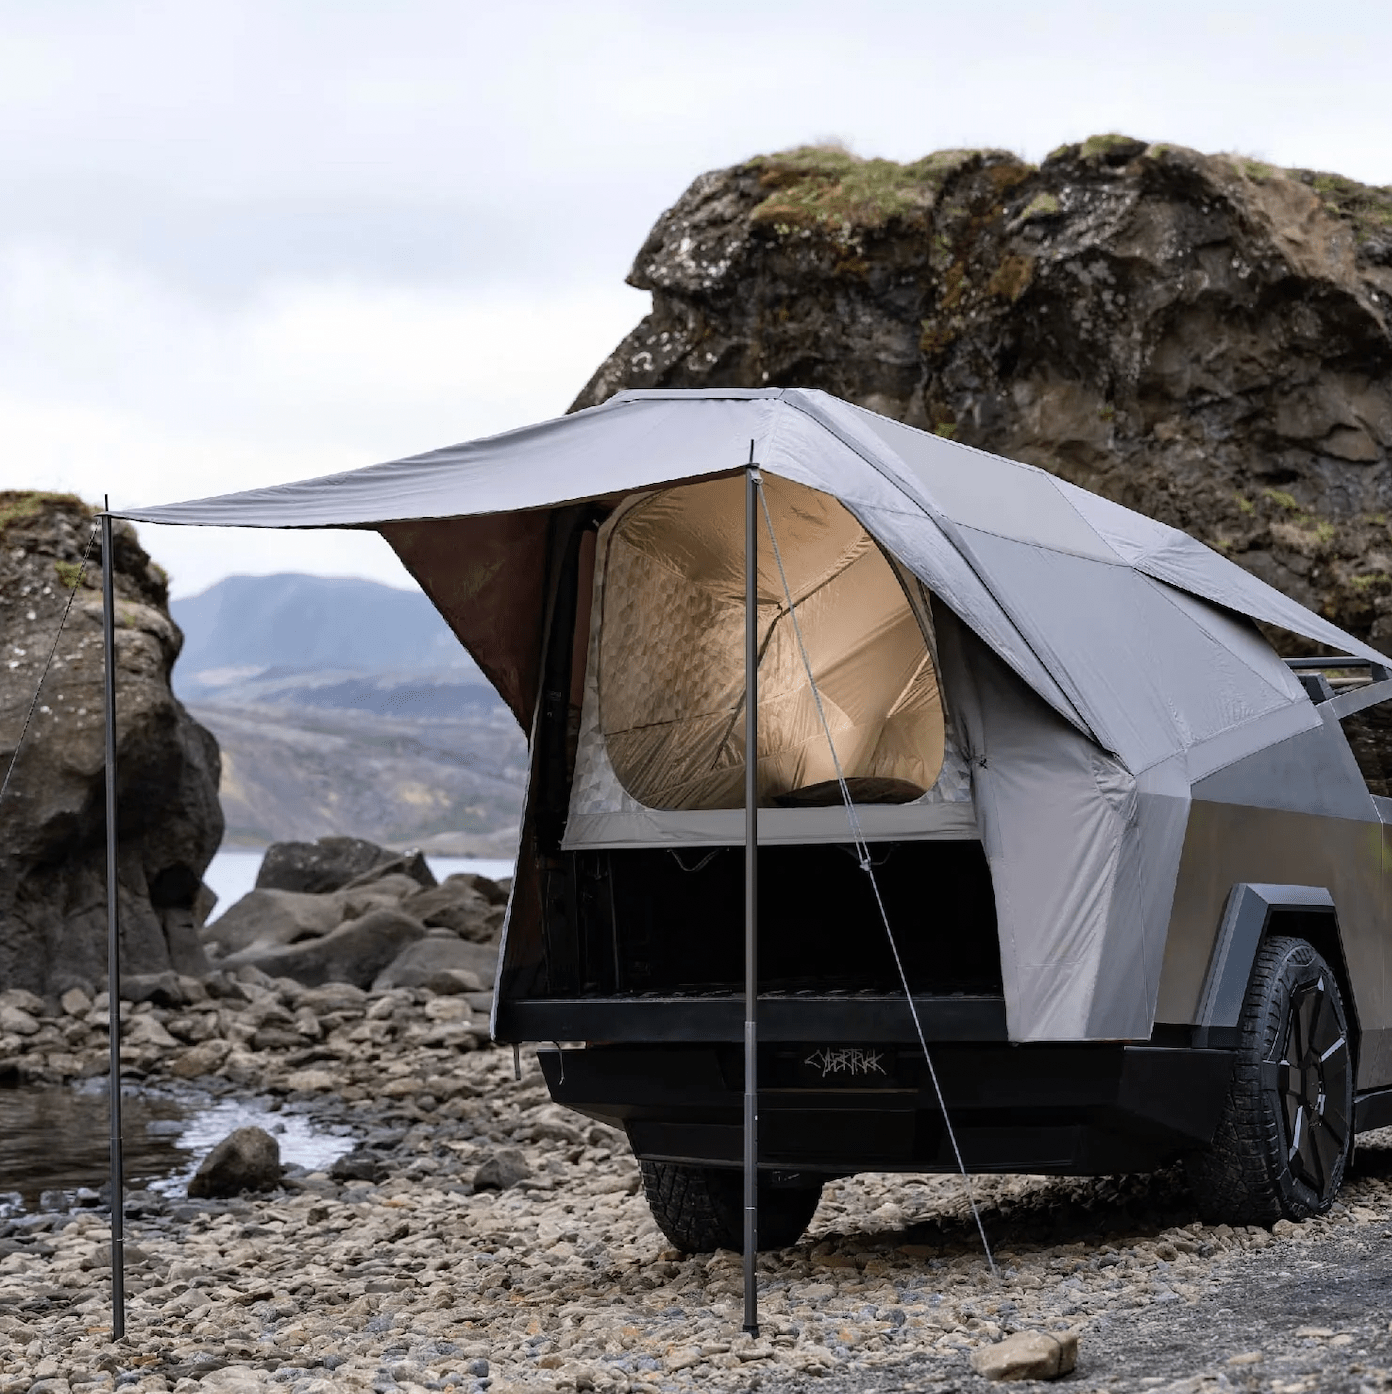 Will This Camp-Ready Collab Make You Want Tesla’s Cybertruck?